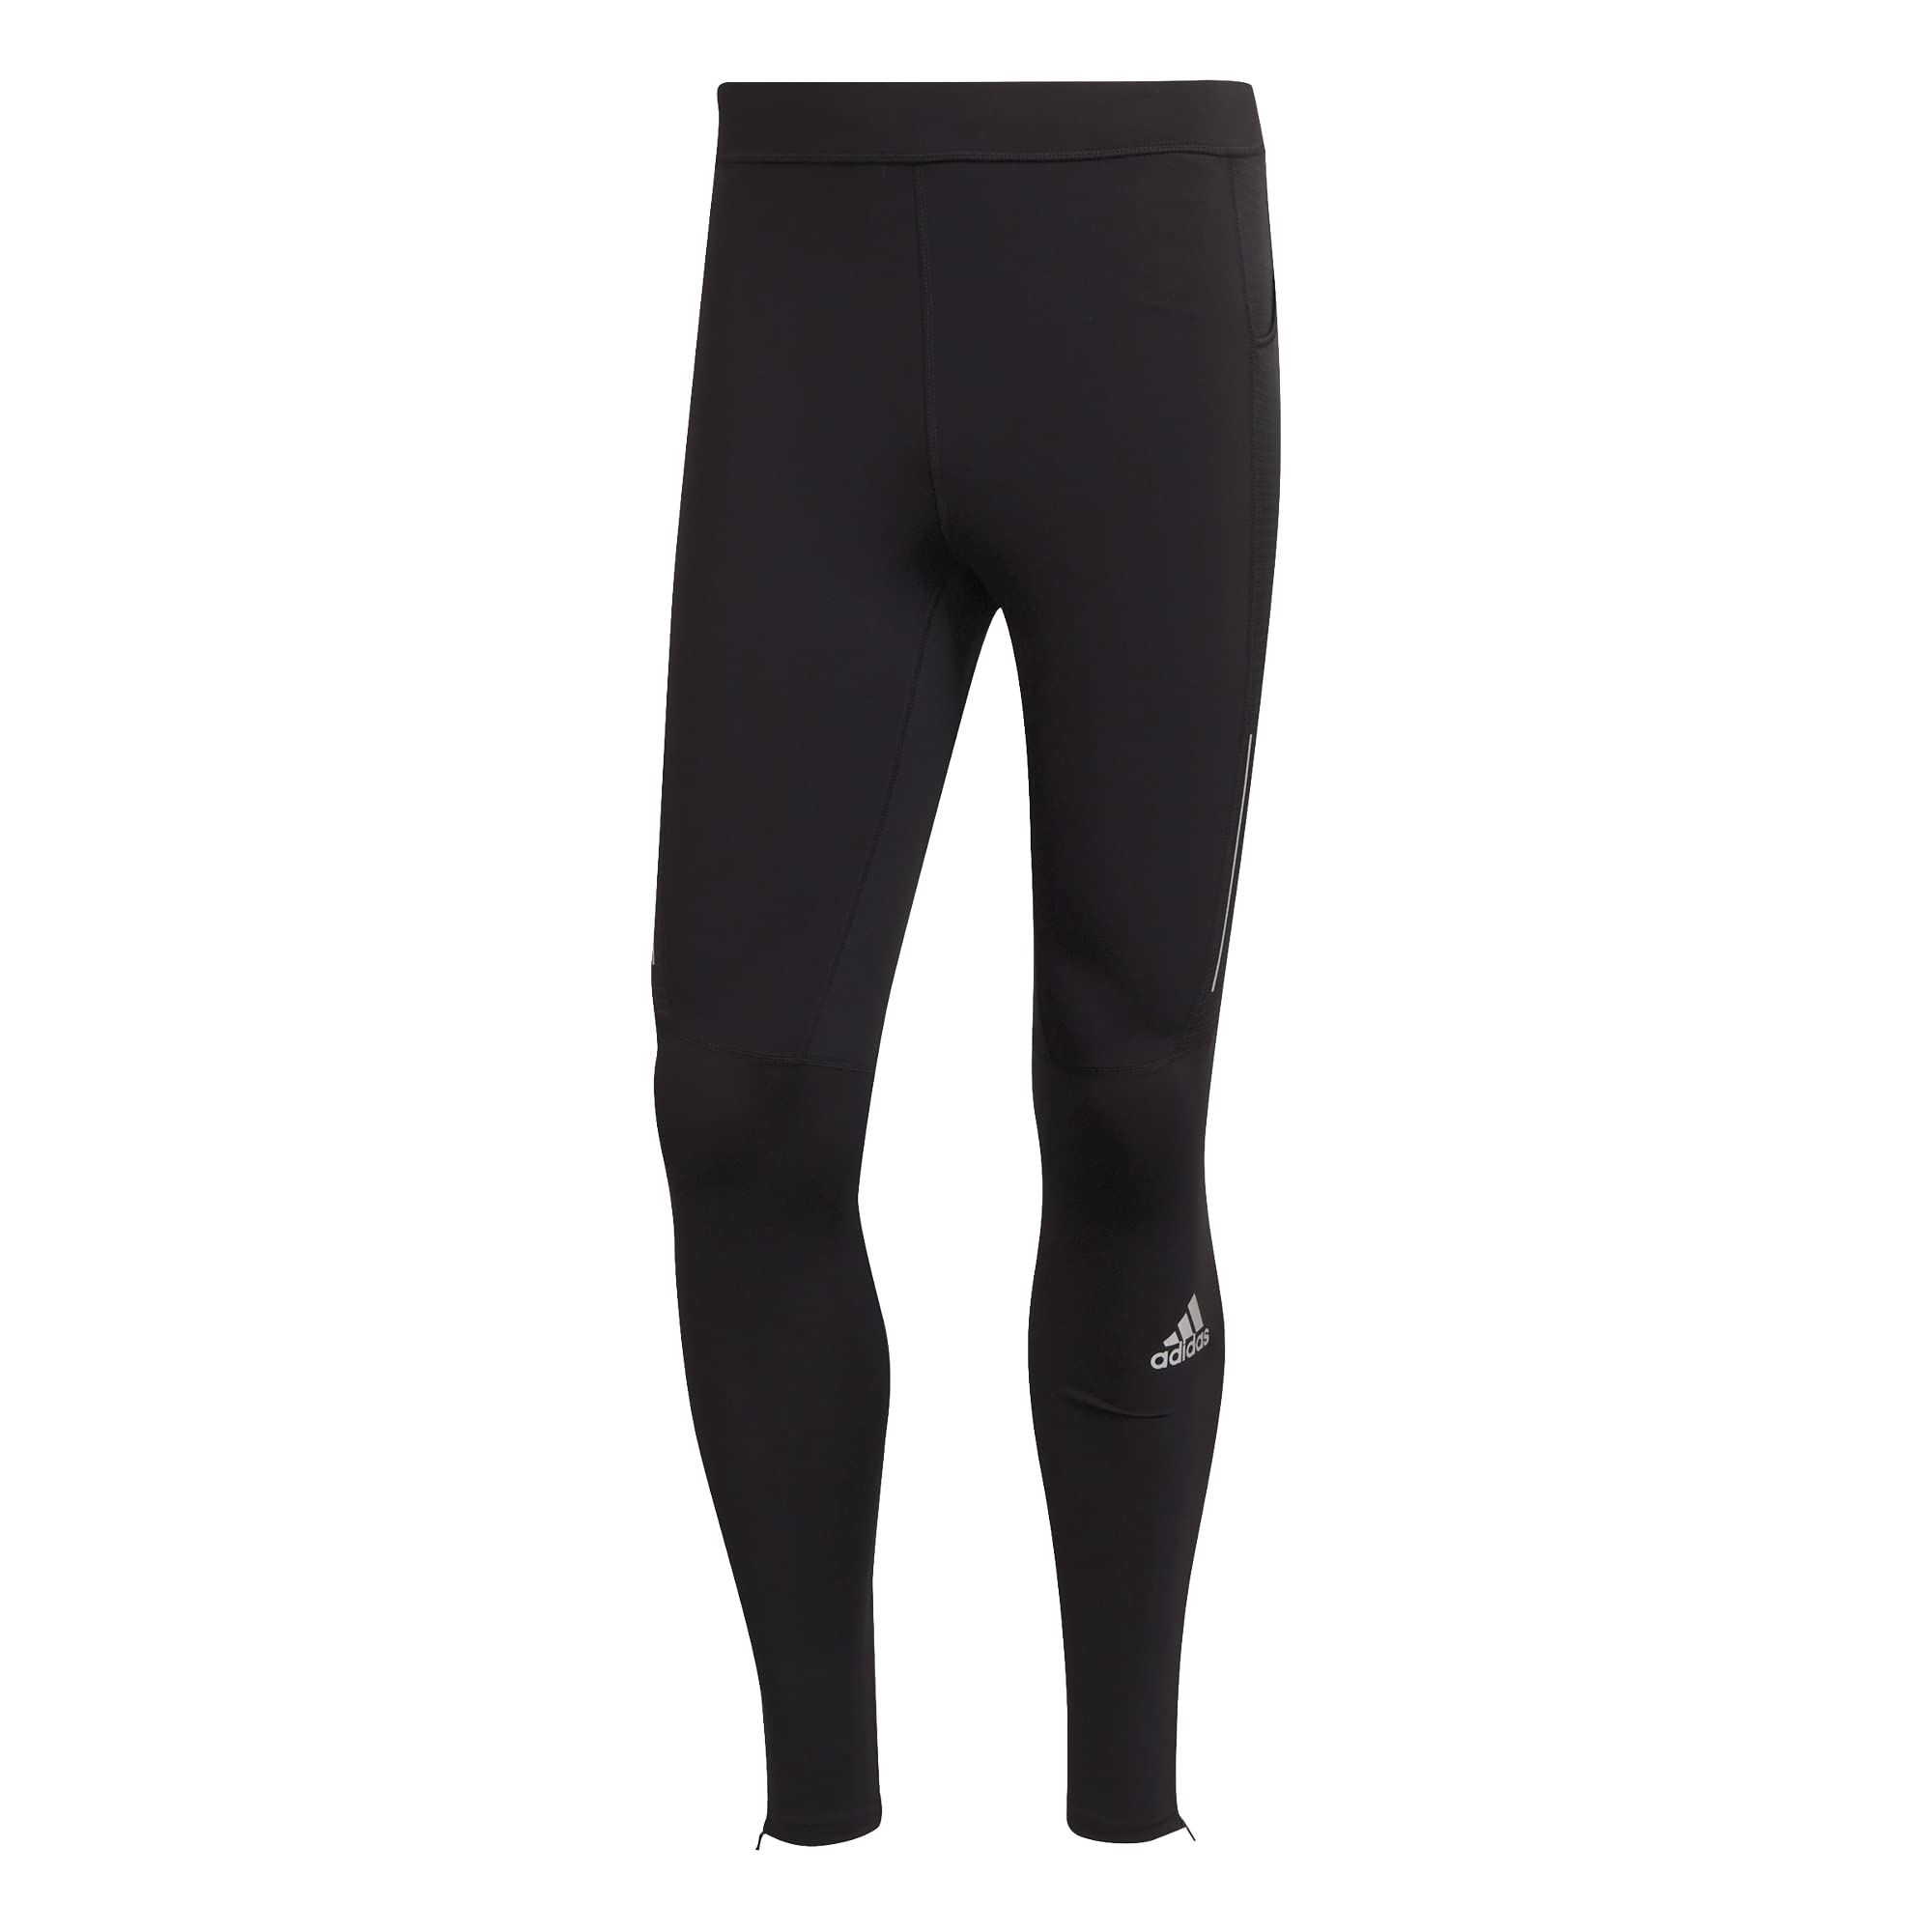 adidas Men's Own The Run Tights Large Black/Reflective Silver